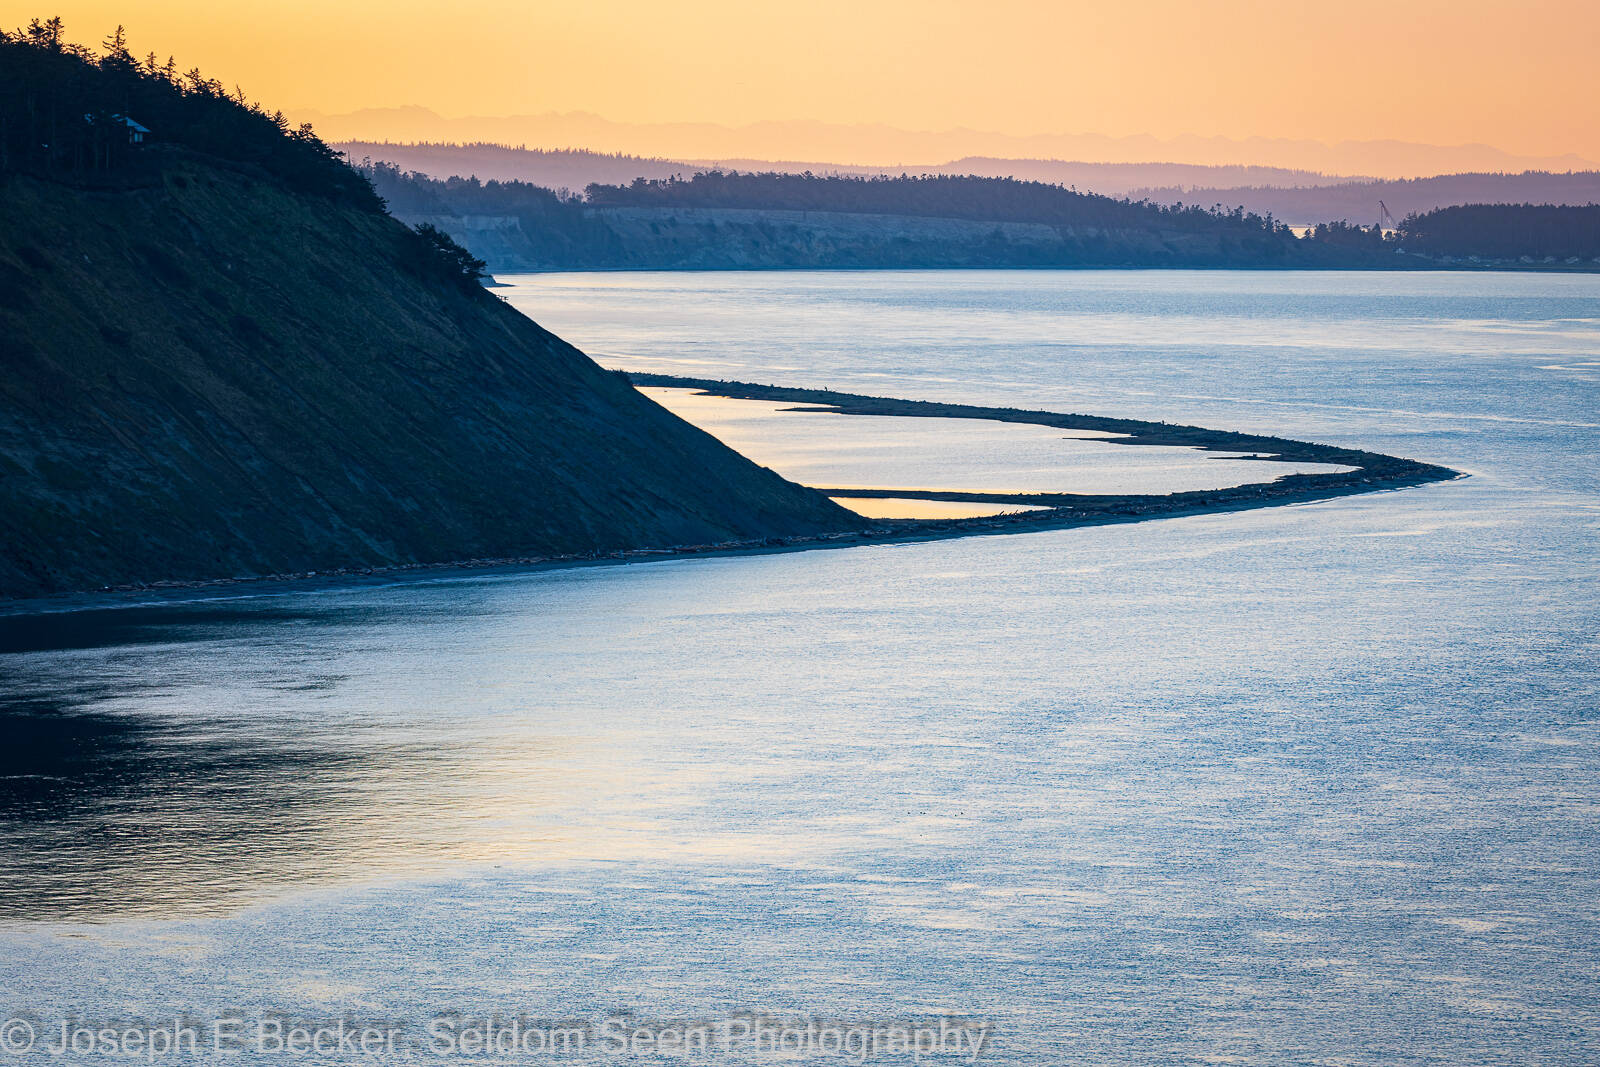 Image of Fort Ebey State Park - Bluff Area by Joe Becker